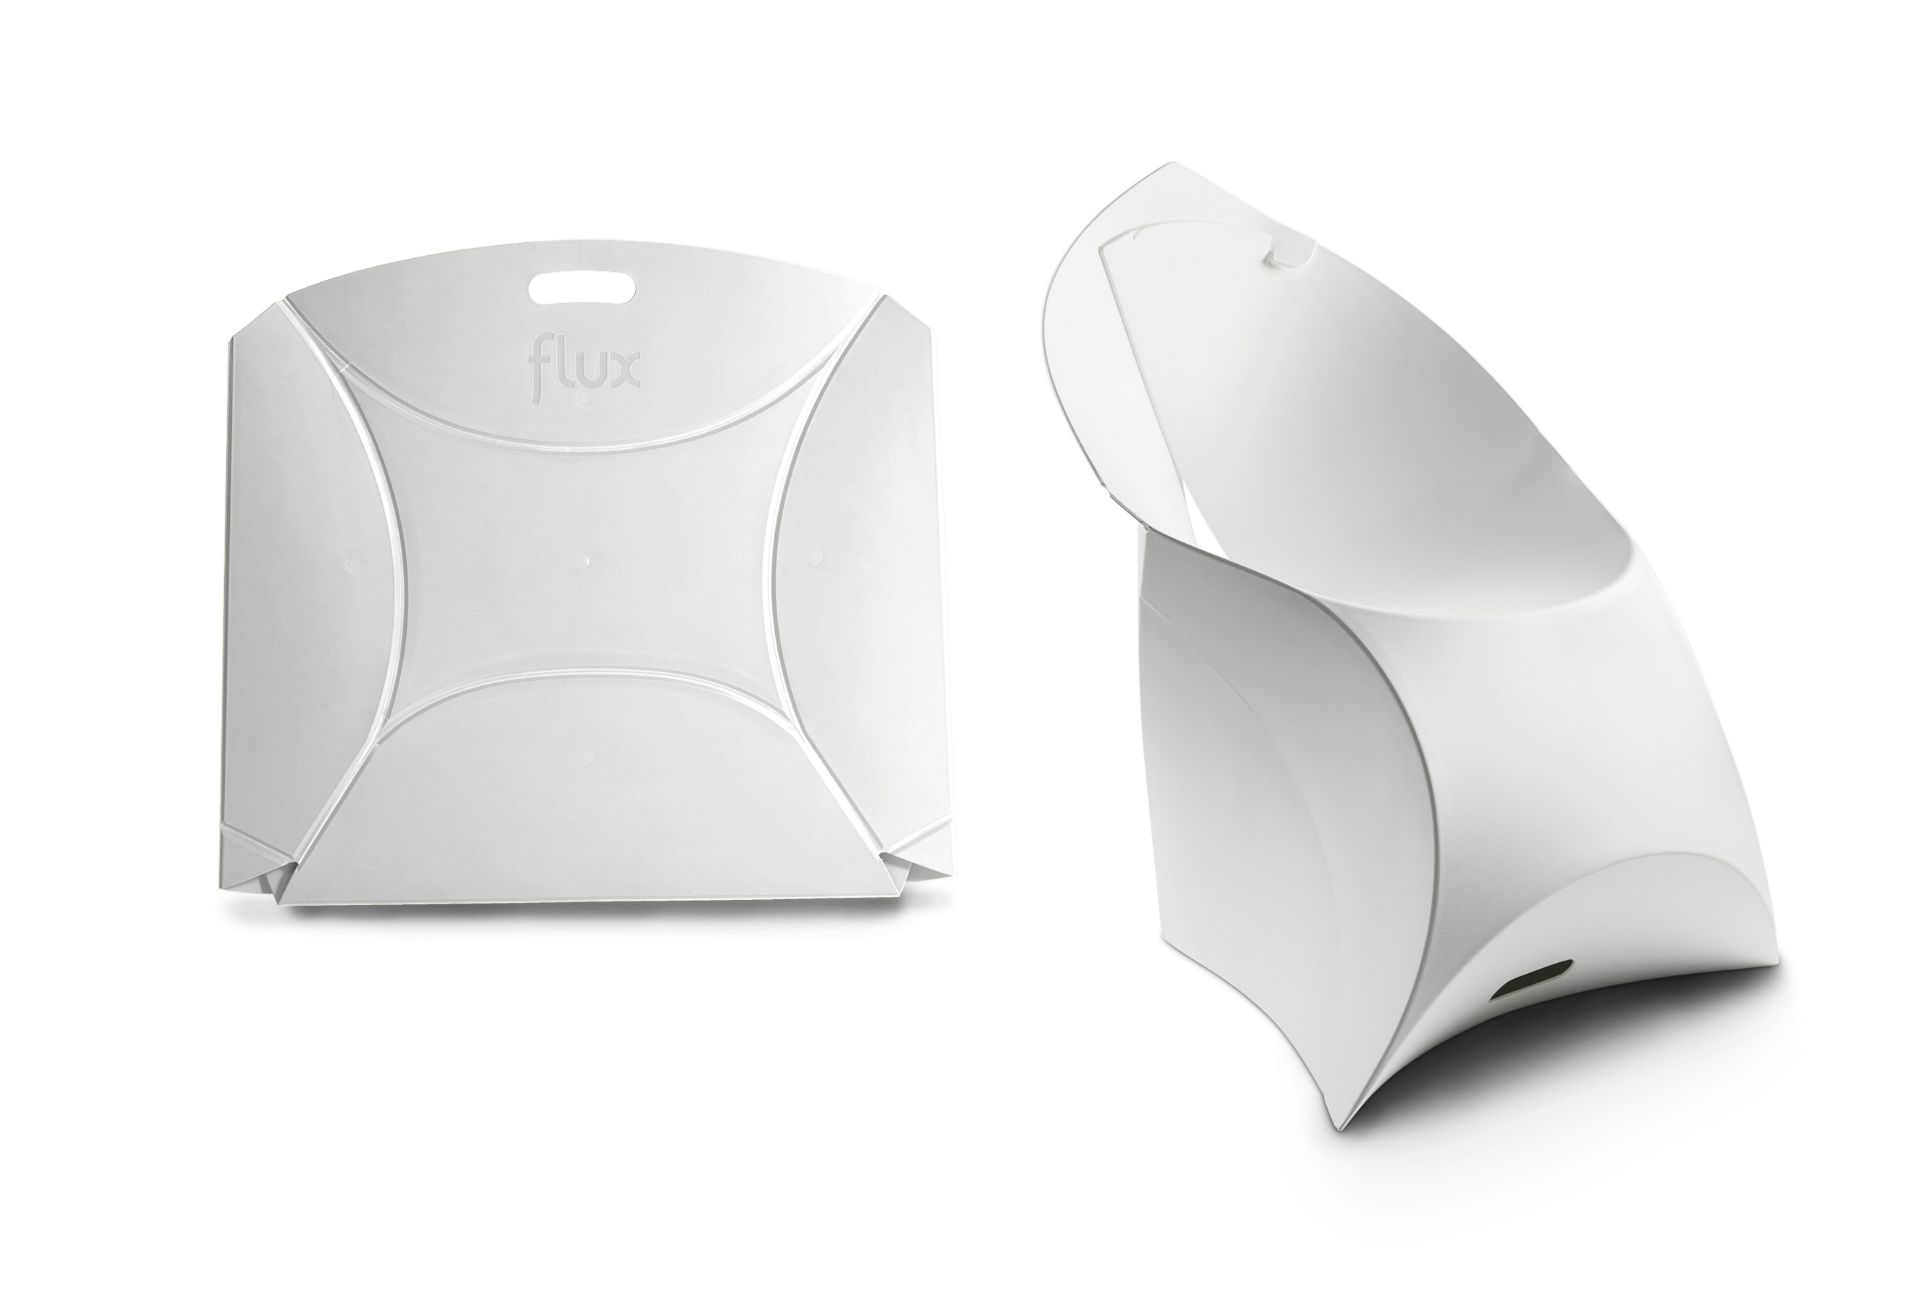 The Flux Foldable Chair . Our Award-Winning Dutch Design. - White - Used - RRP £120